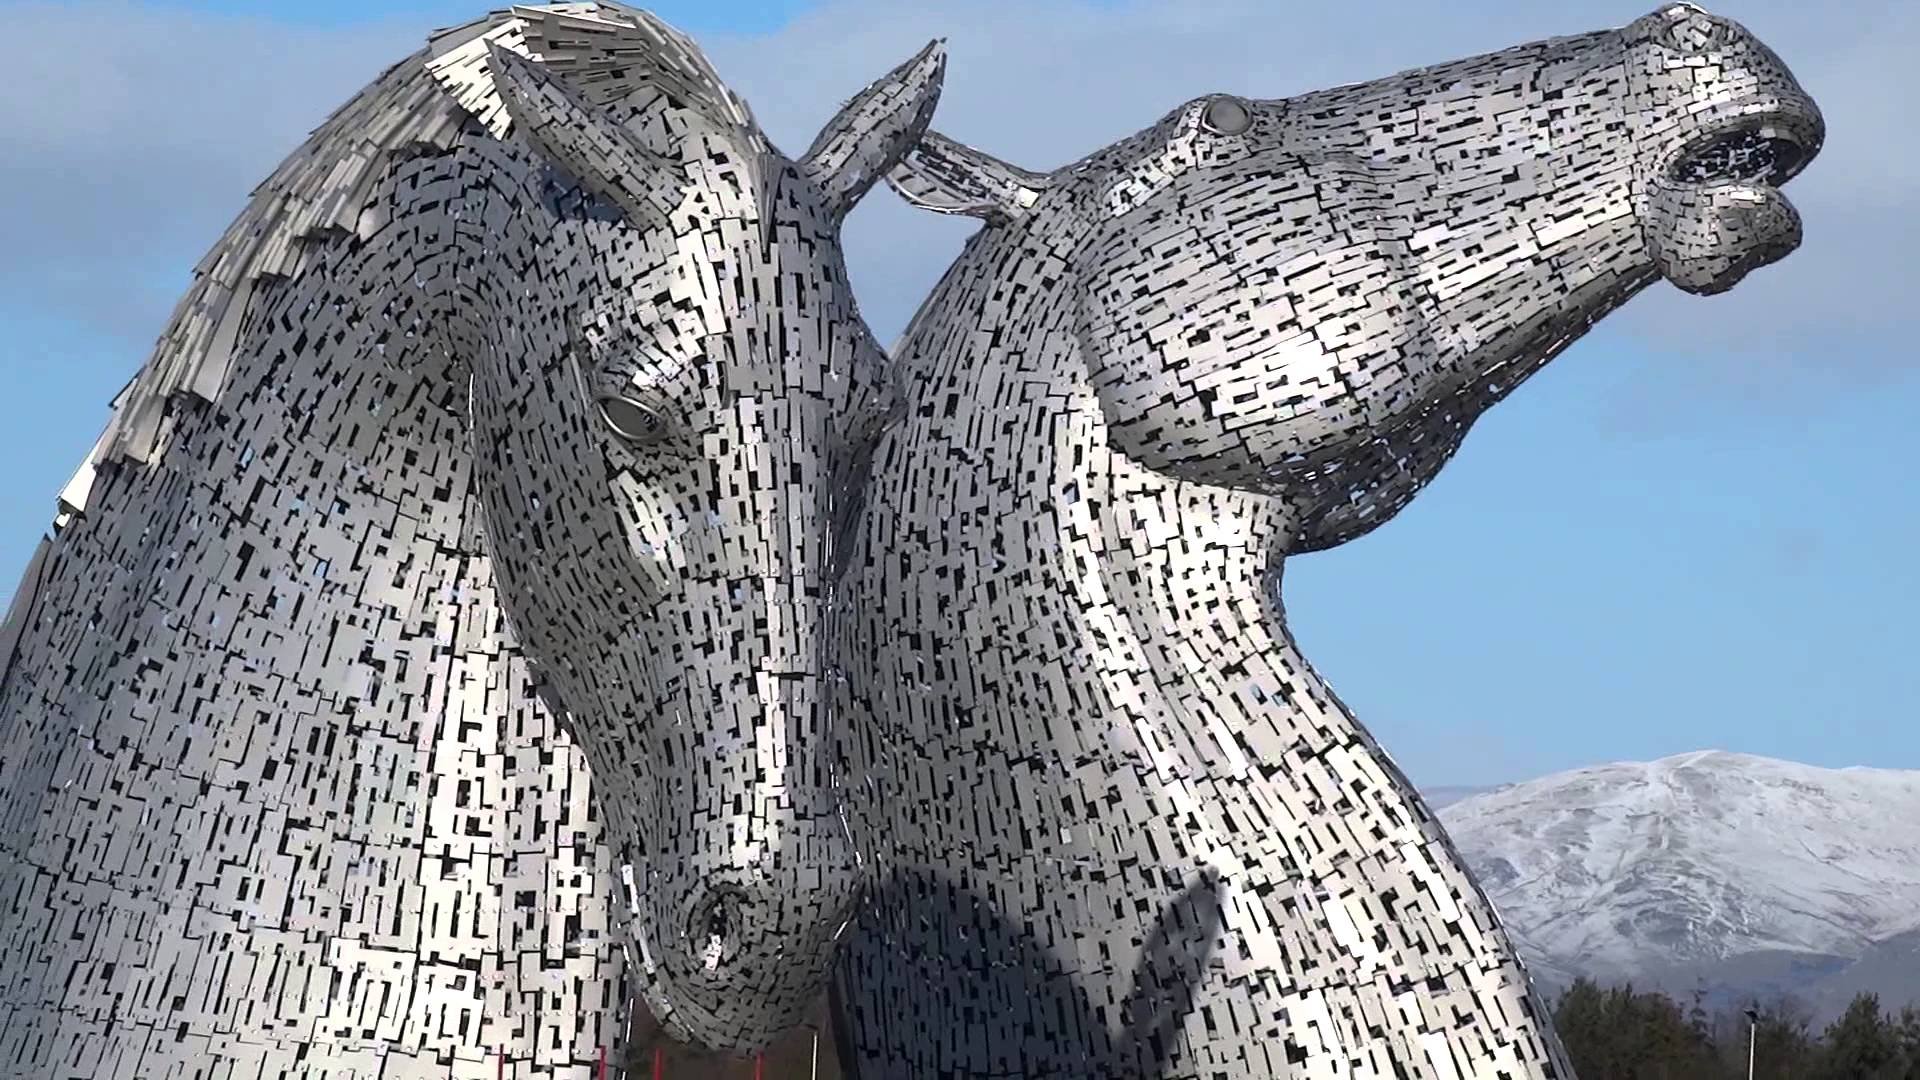 Kelpies 4k Wallpapers For Your Desktop Or Mobile Screen Free And Images, Photos, Reviews